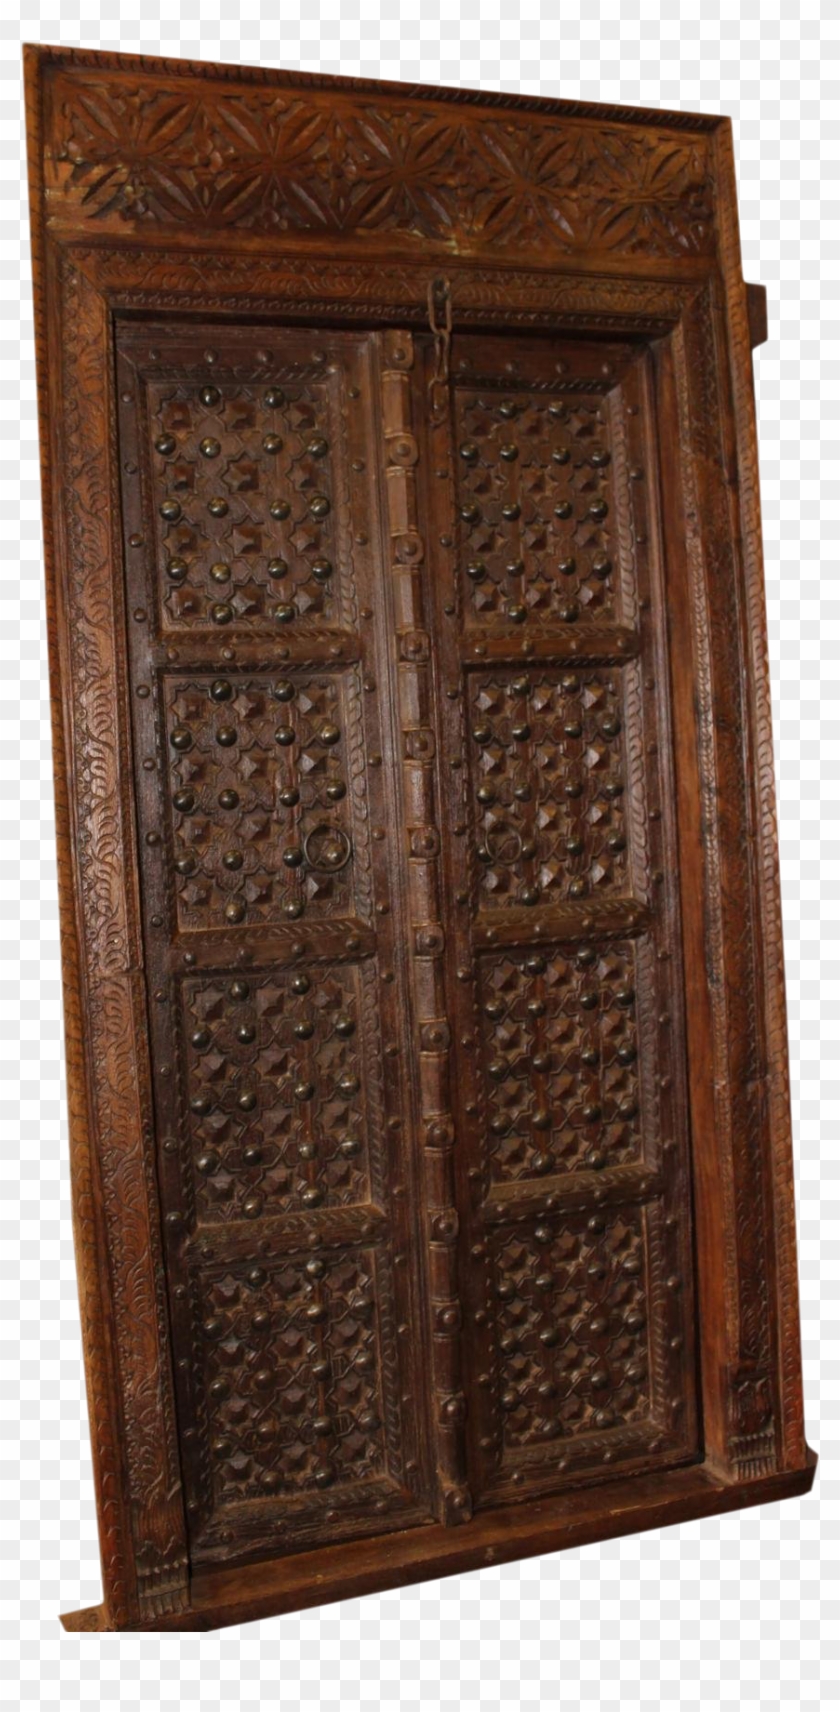 Antique Indian Carved Wooden Door With Metal Fittings - Cupboard Clipart